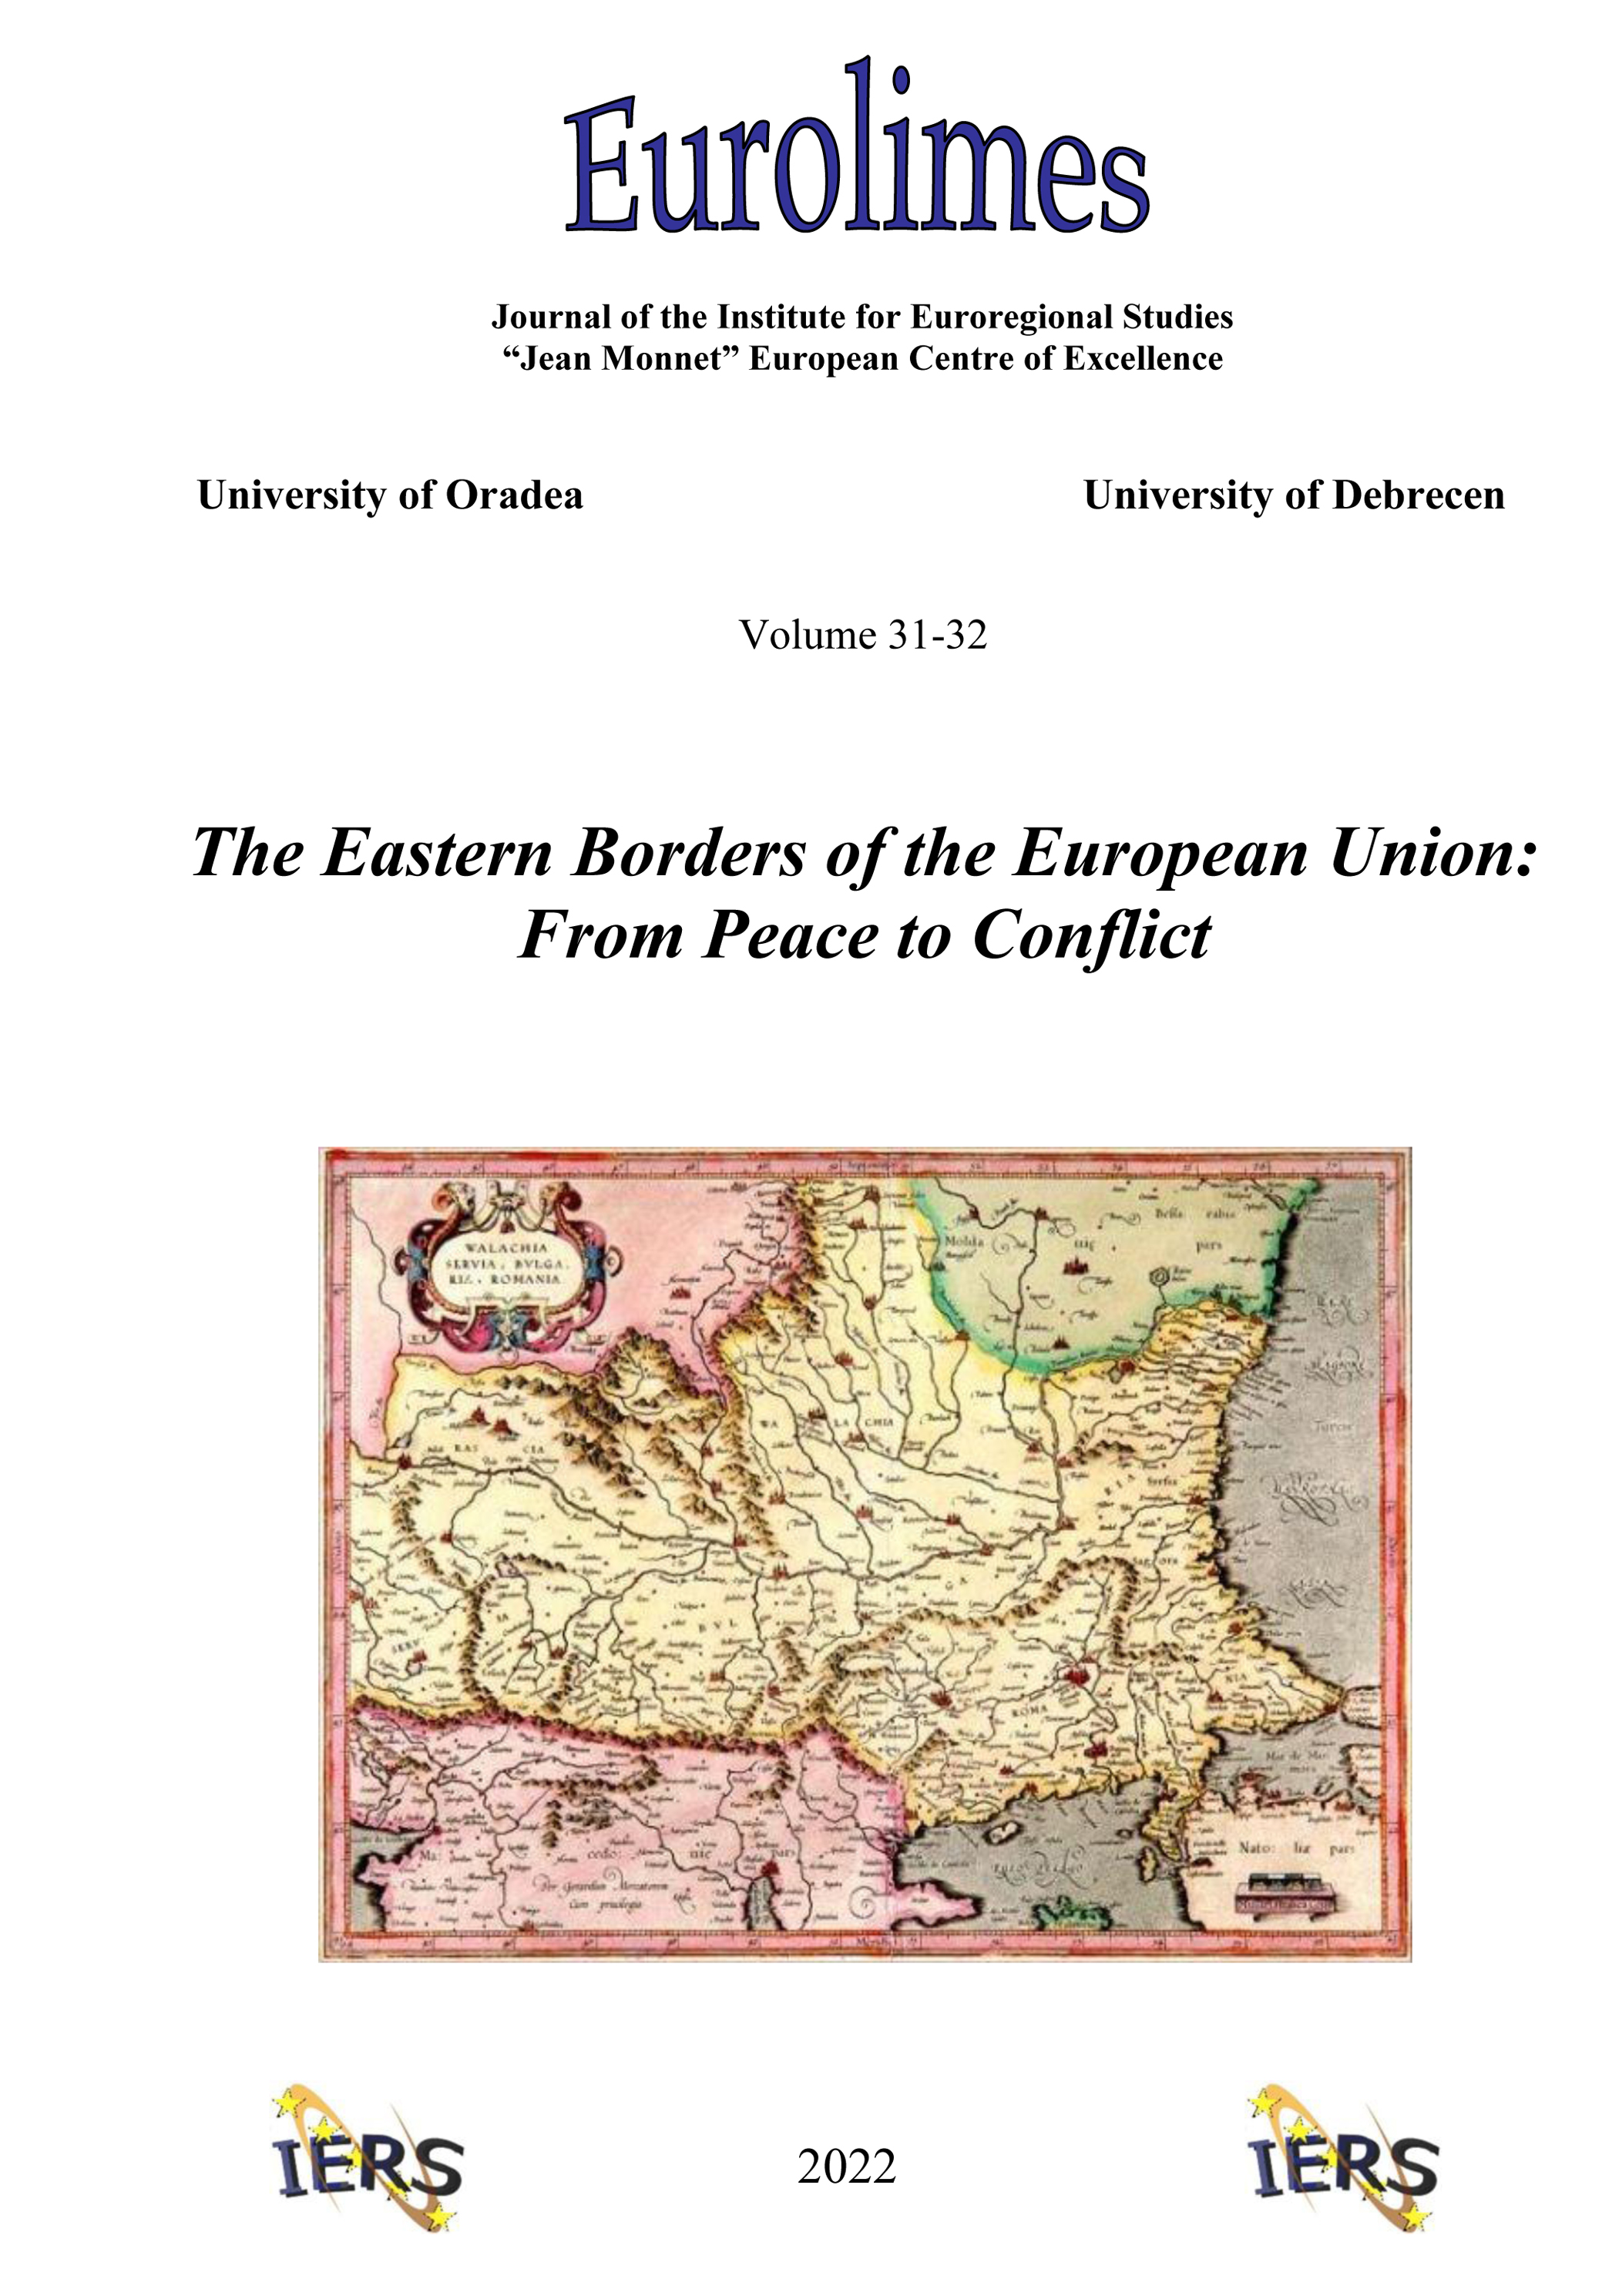 The Eastern Borders of the European Union: From Peace to Conflict